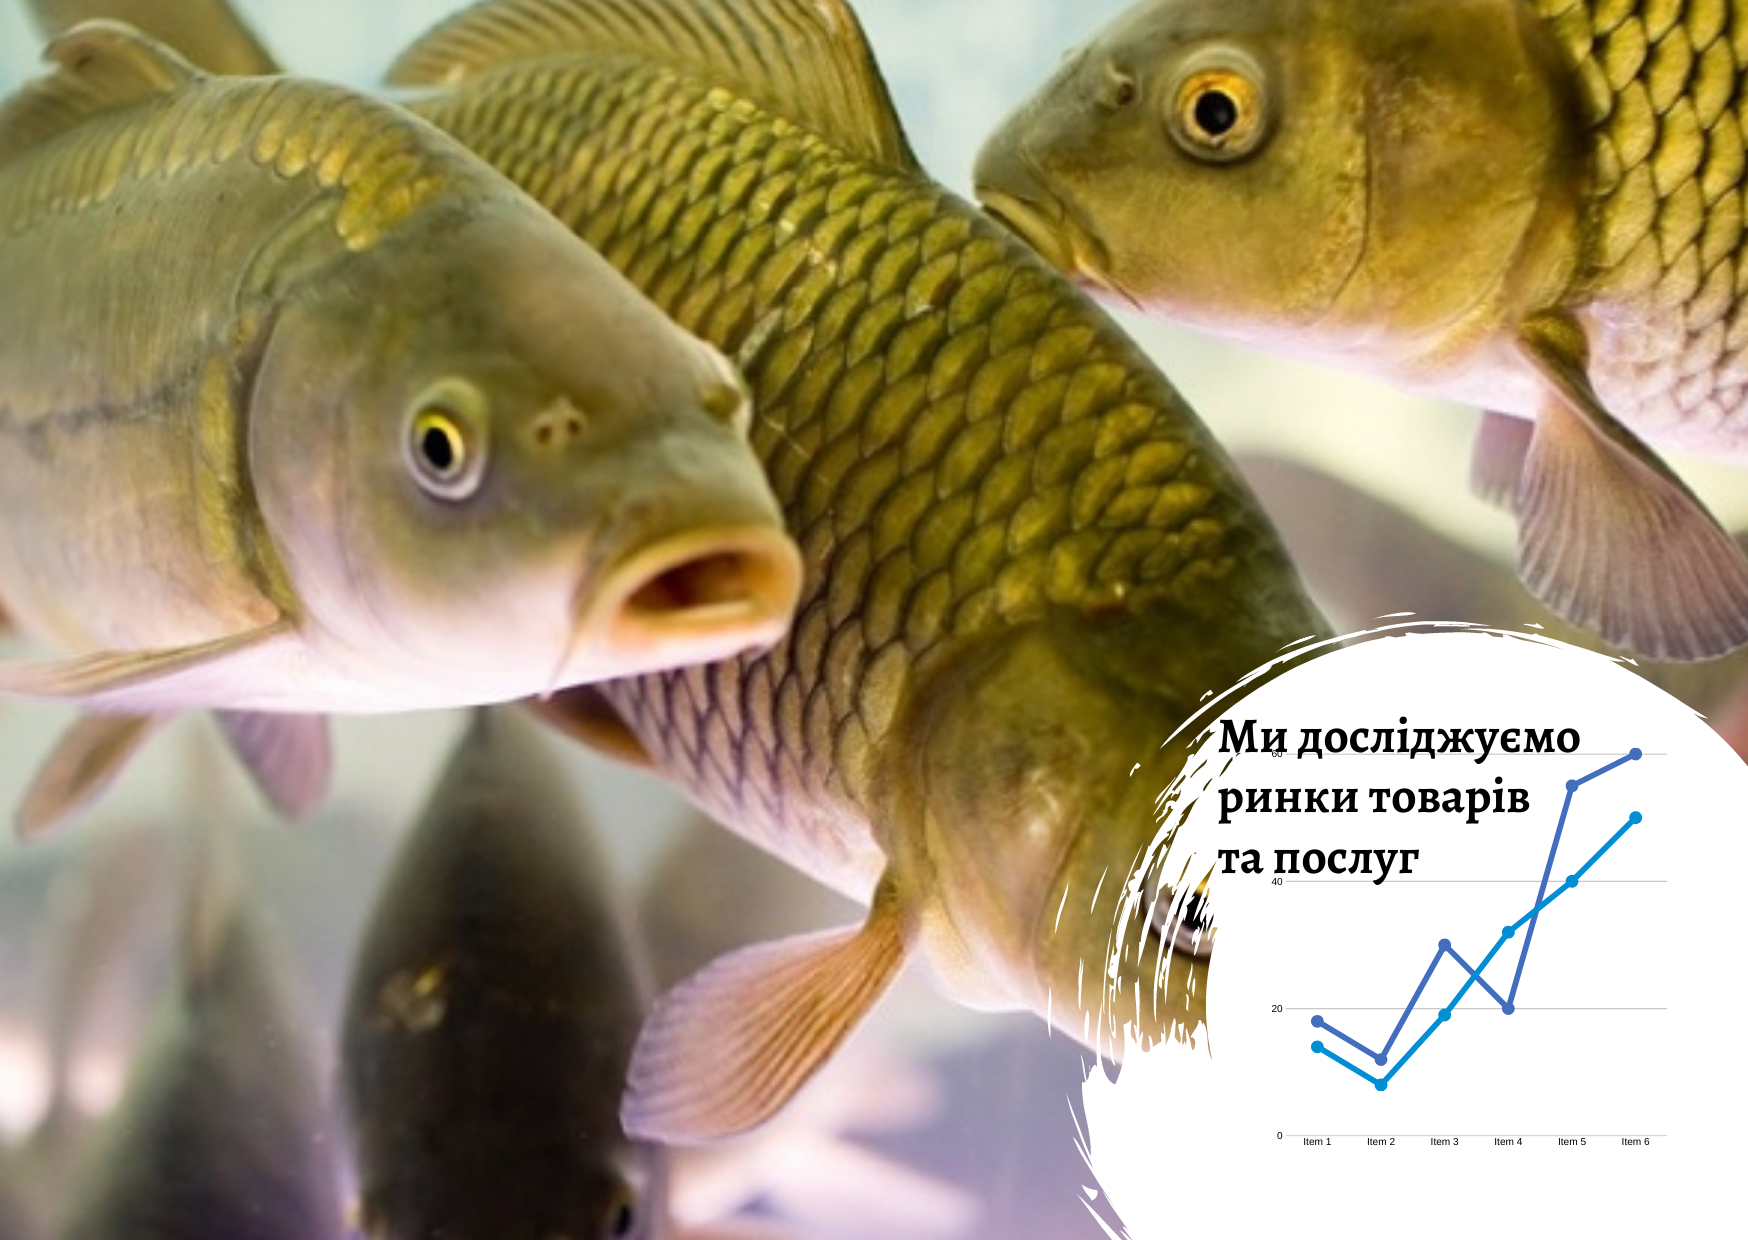 Ukrainian aquaculture and processed products market 